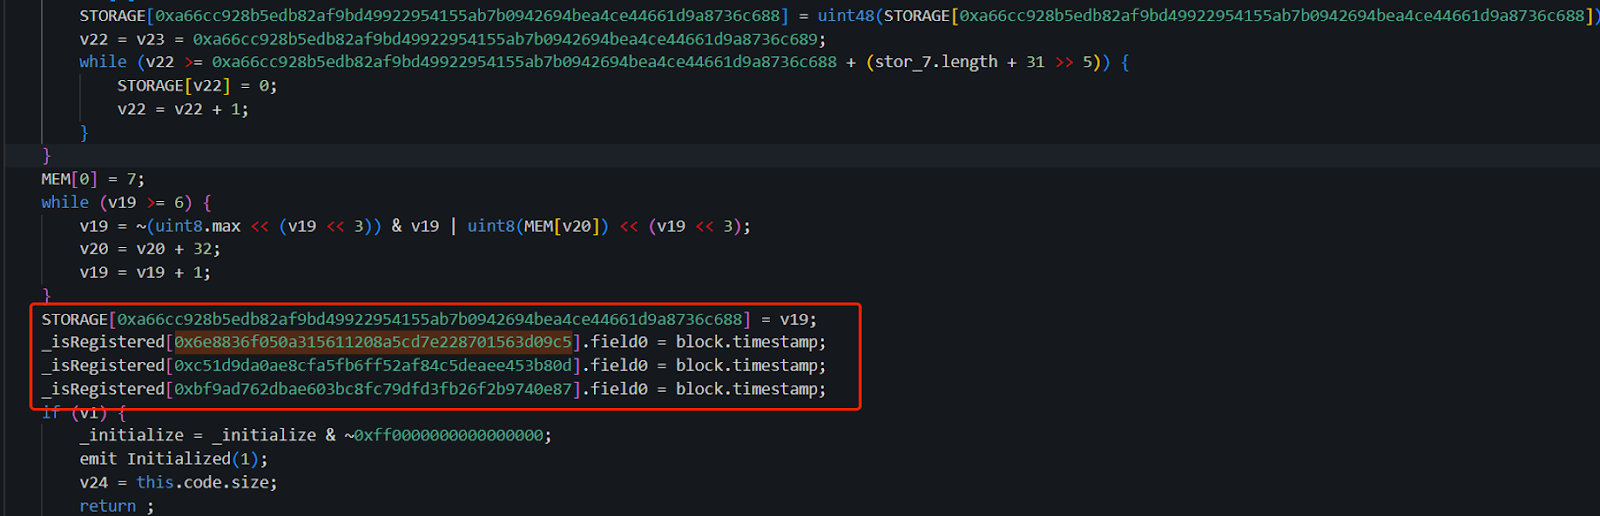 Smart Contract Code Showing Registration Timestamps